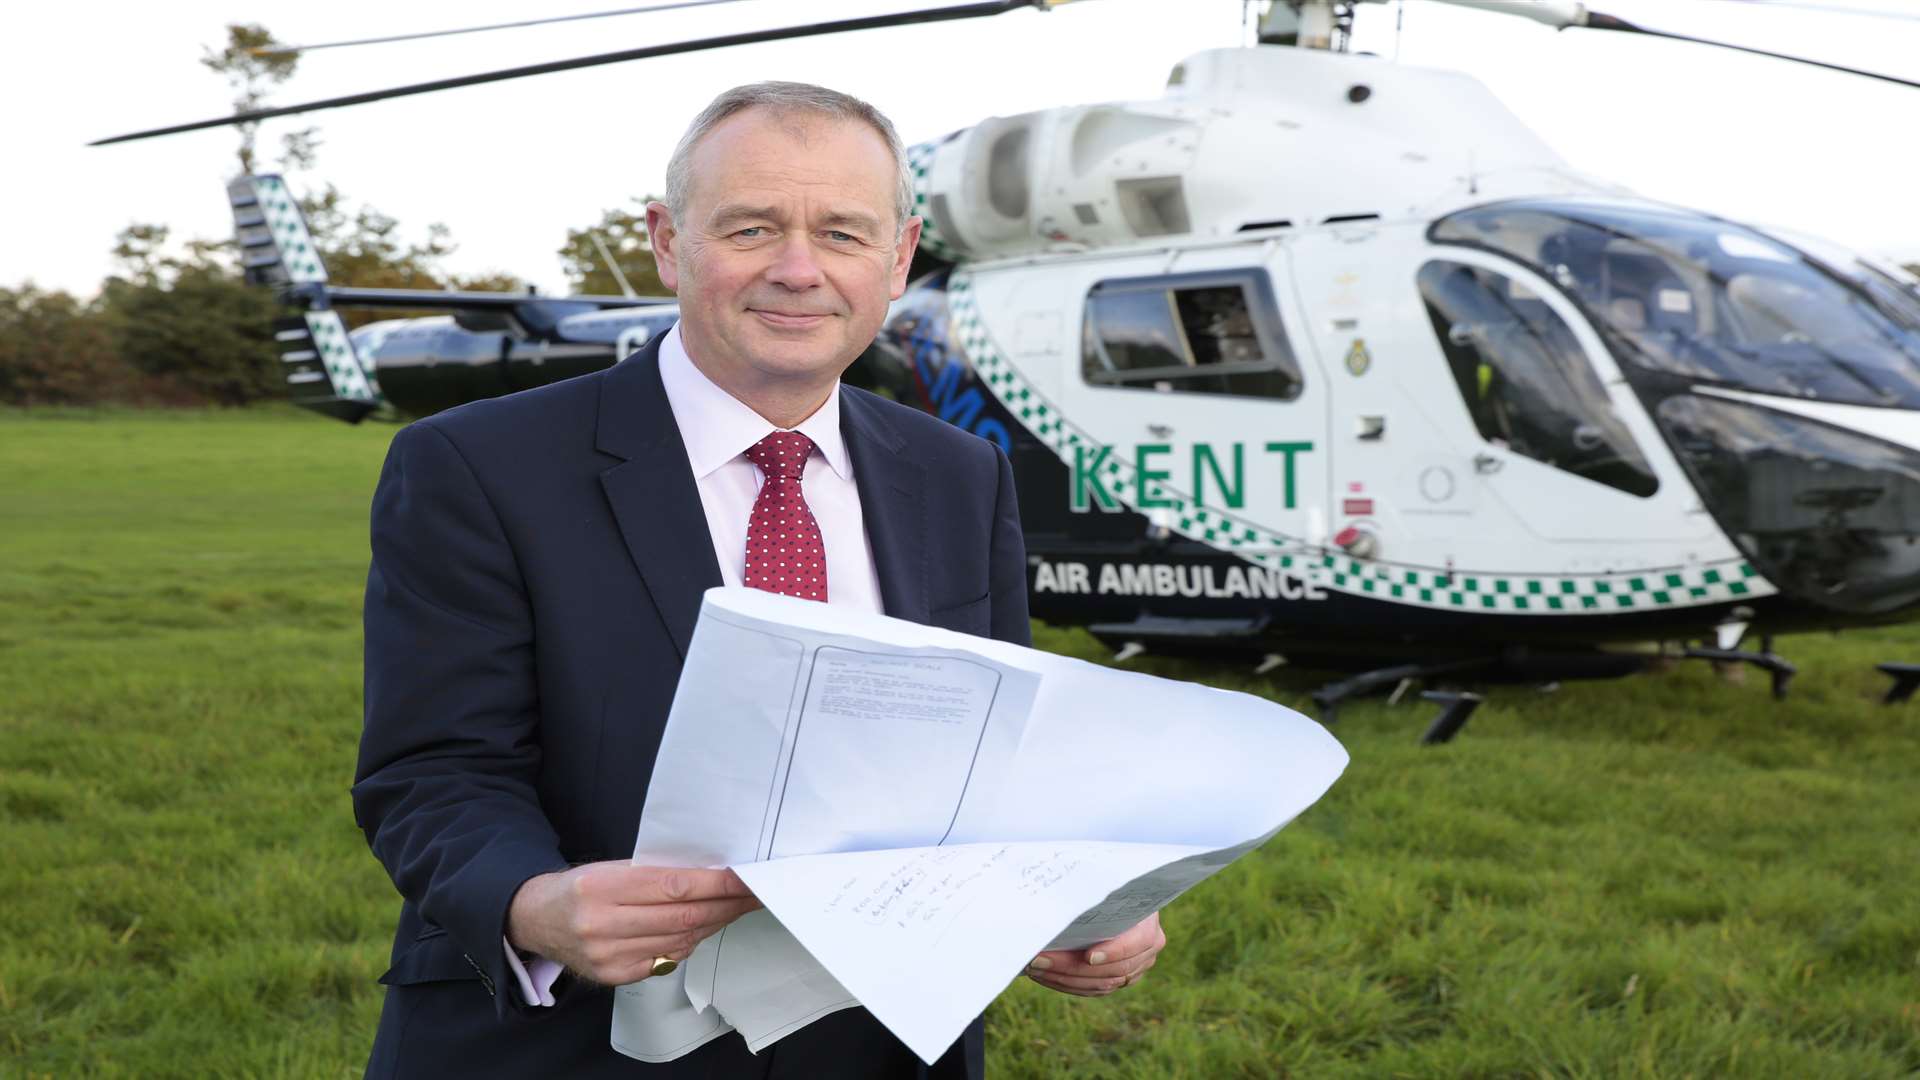 Air ambulance chief executive Adrian Bell with plans for the Paddock Wood site, which have now been shelved